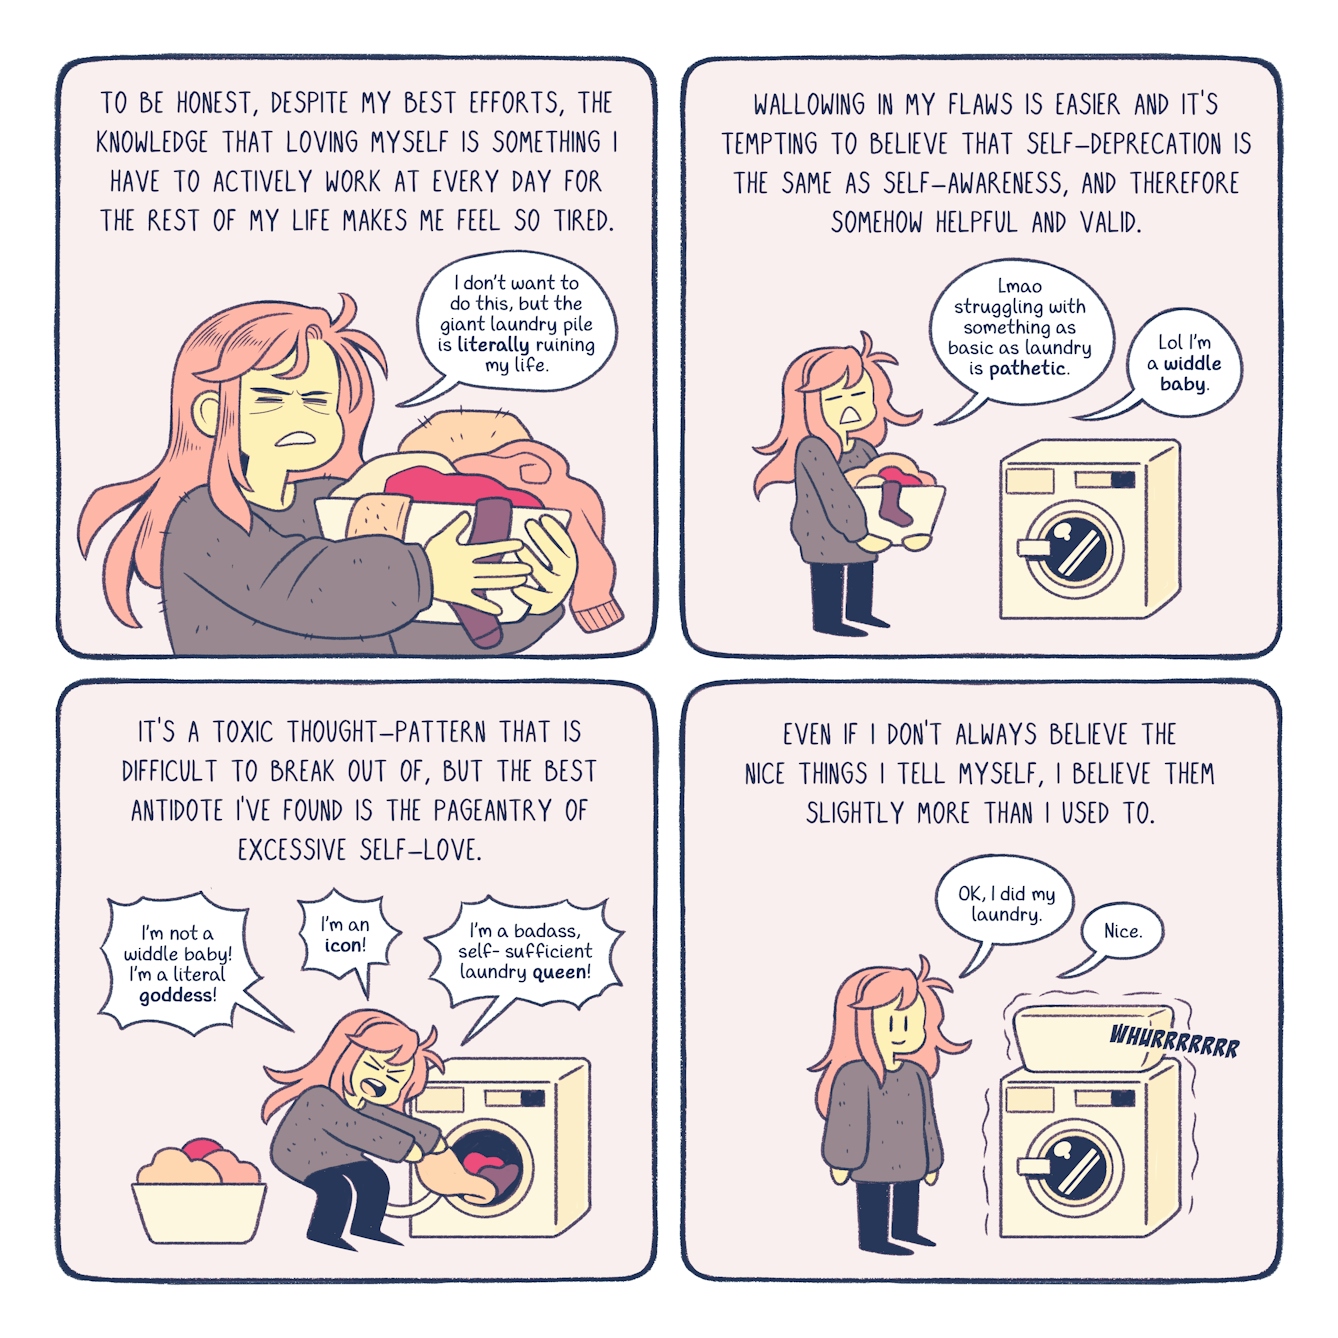 A four panel comic about self-love. In the first panel, the narration reads, 'to be honest, despite my best efforts, the knowledge that loving myself is something I have to actively work at every day for the rest of my life makes me feel so tired. Bex is carrying an overflowing a basket of laundry. She says, 'I don't want to do this, but the giant pile of laundry is literally ruining my life.' 

In the second panel, the narration reads, 'Wallowing in my flaws is easier and it's tempting to believe that self-deprecation is the same as self-awareness, and therefore somehow helpful and valid.' Bex approaches the washing machine. She says aloud, 'lmao struggling with something as basic as laundry is pathetic. lol I'm a widdle baby.'

In the third panel, the narration reads, 'It's a toxic thought-pattern that is difficult to break out of, but the best antidote I've found is the pageantry of excessive self-love. Bex shoves the dirty clothes into the washing machine. Triumphantly, she yells, 'I'm not a widdle baby! I'm a literal goddess! I'm an icon! I'm a badass, self-sufficient laundry queen!'

In the final panel, Bex has finished her laundry. As the washing machine whurrs loudly, the narration reads, 'even if I don't always believe the nice things I tell myself, I believe them slightly more than I used to.' Smiling, she simply says, 'OK, I did my laundry. Nice.'